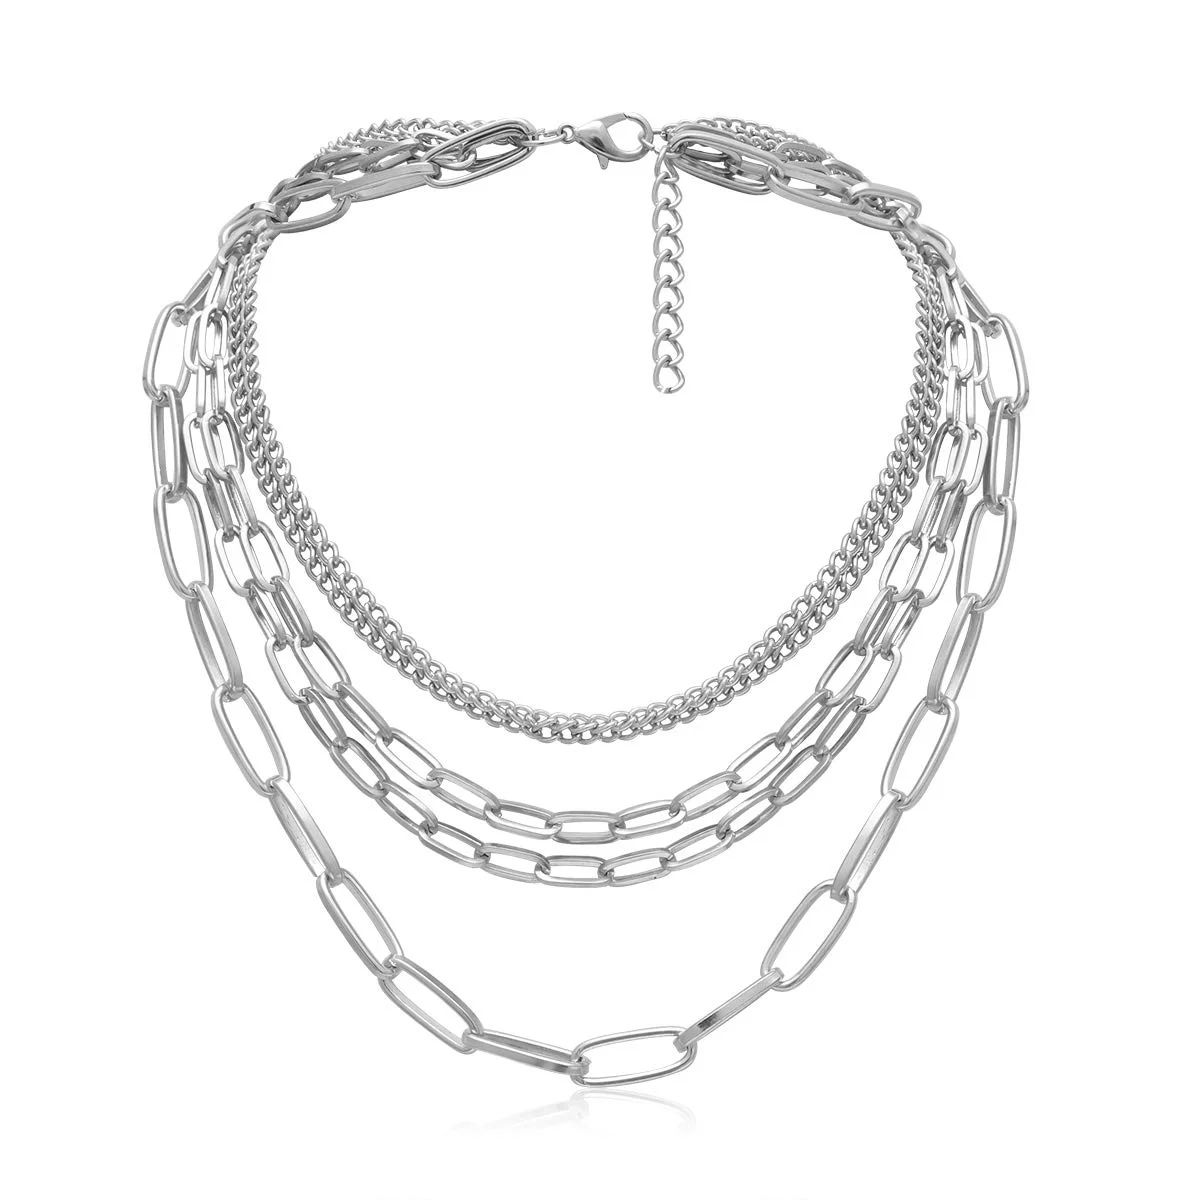 Layered Chain Necklaces for women 18 Inch Gold Plated Paperclip Chain Silver Tone Choker Necklace... | Walmart (US)